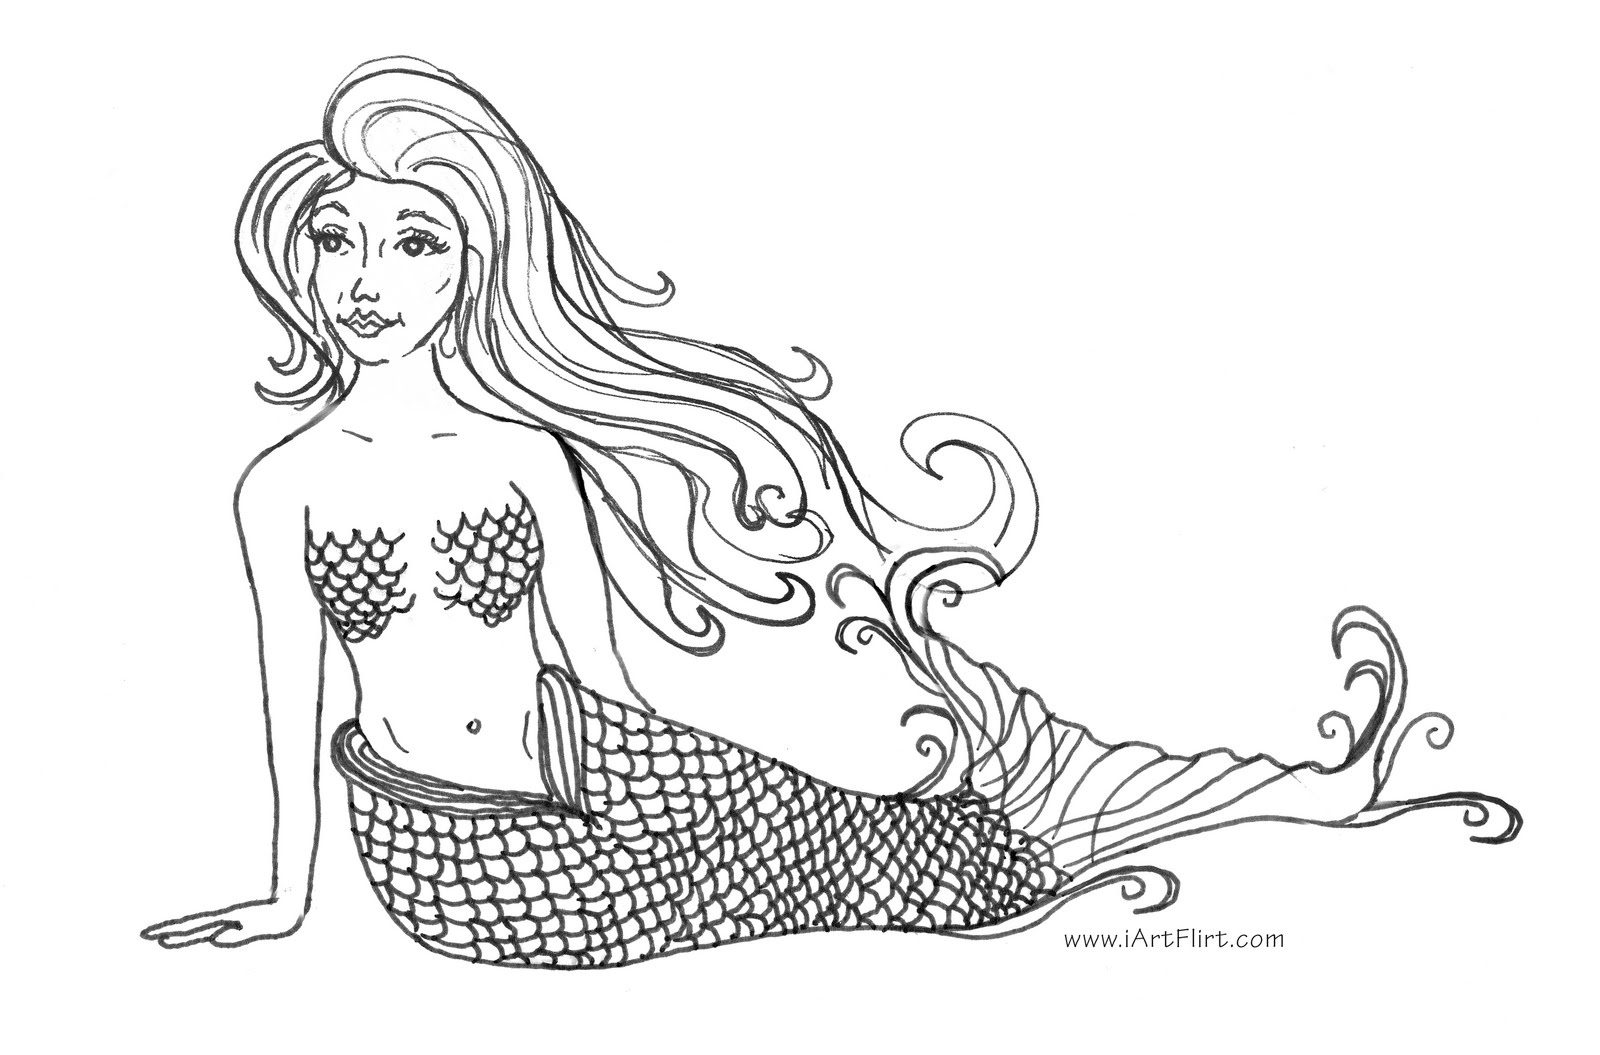 Free coloring pages of mermaids for adults